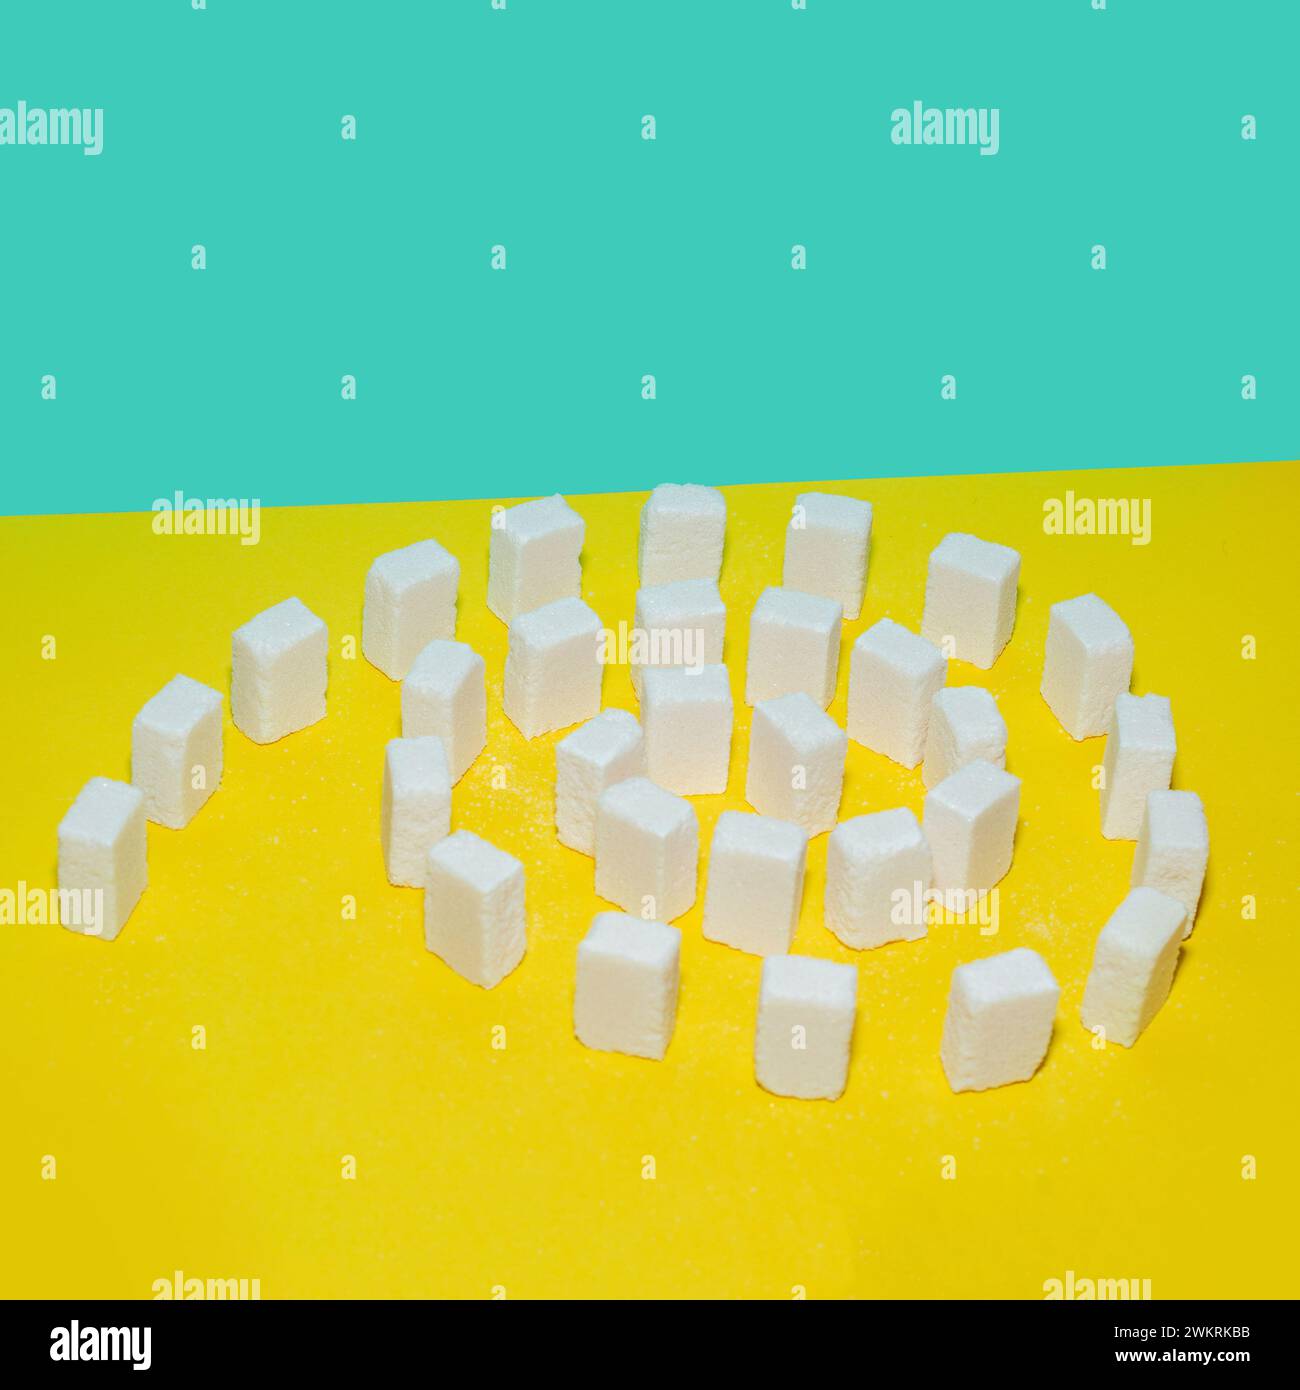 White sugar cubes on a yellow and blue background. Creative concept top view. Stock Photo